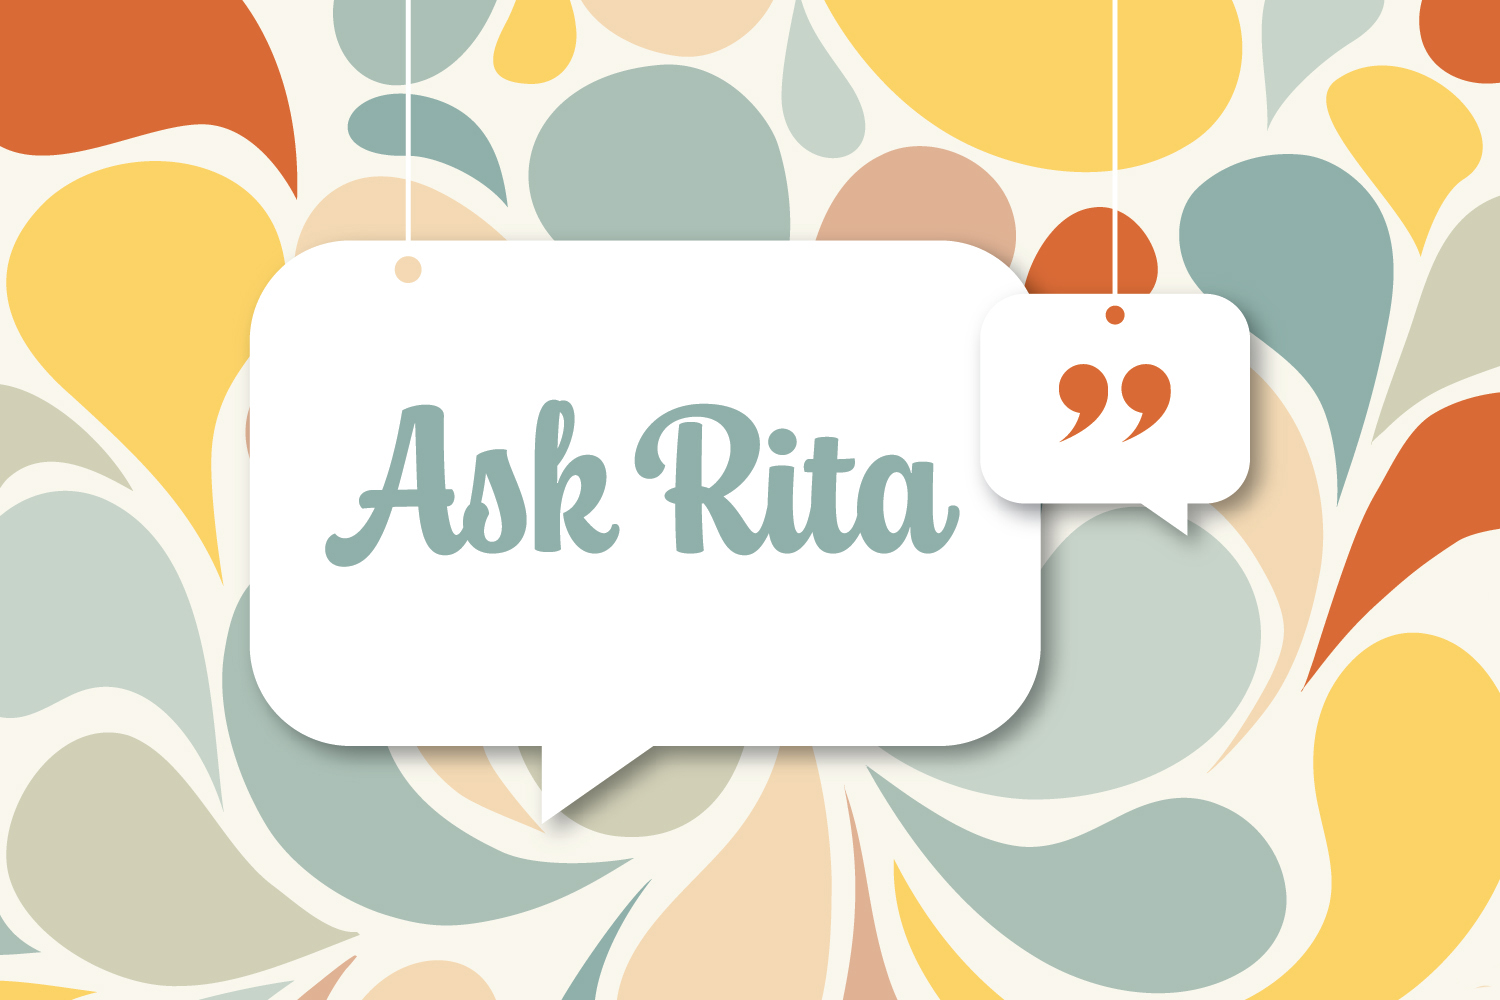 Ask Rita: What Is a Hostile Work Environment?